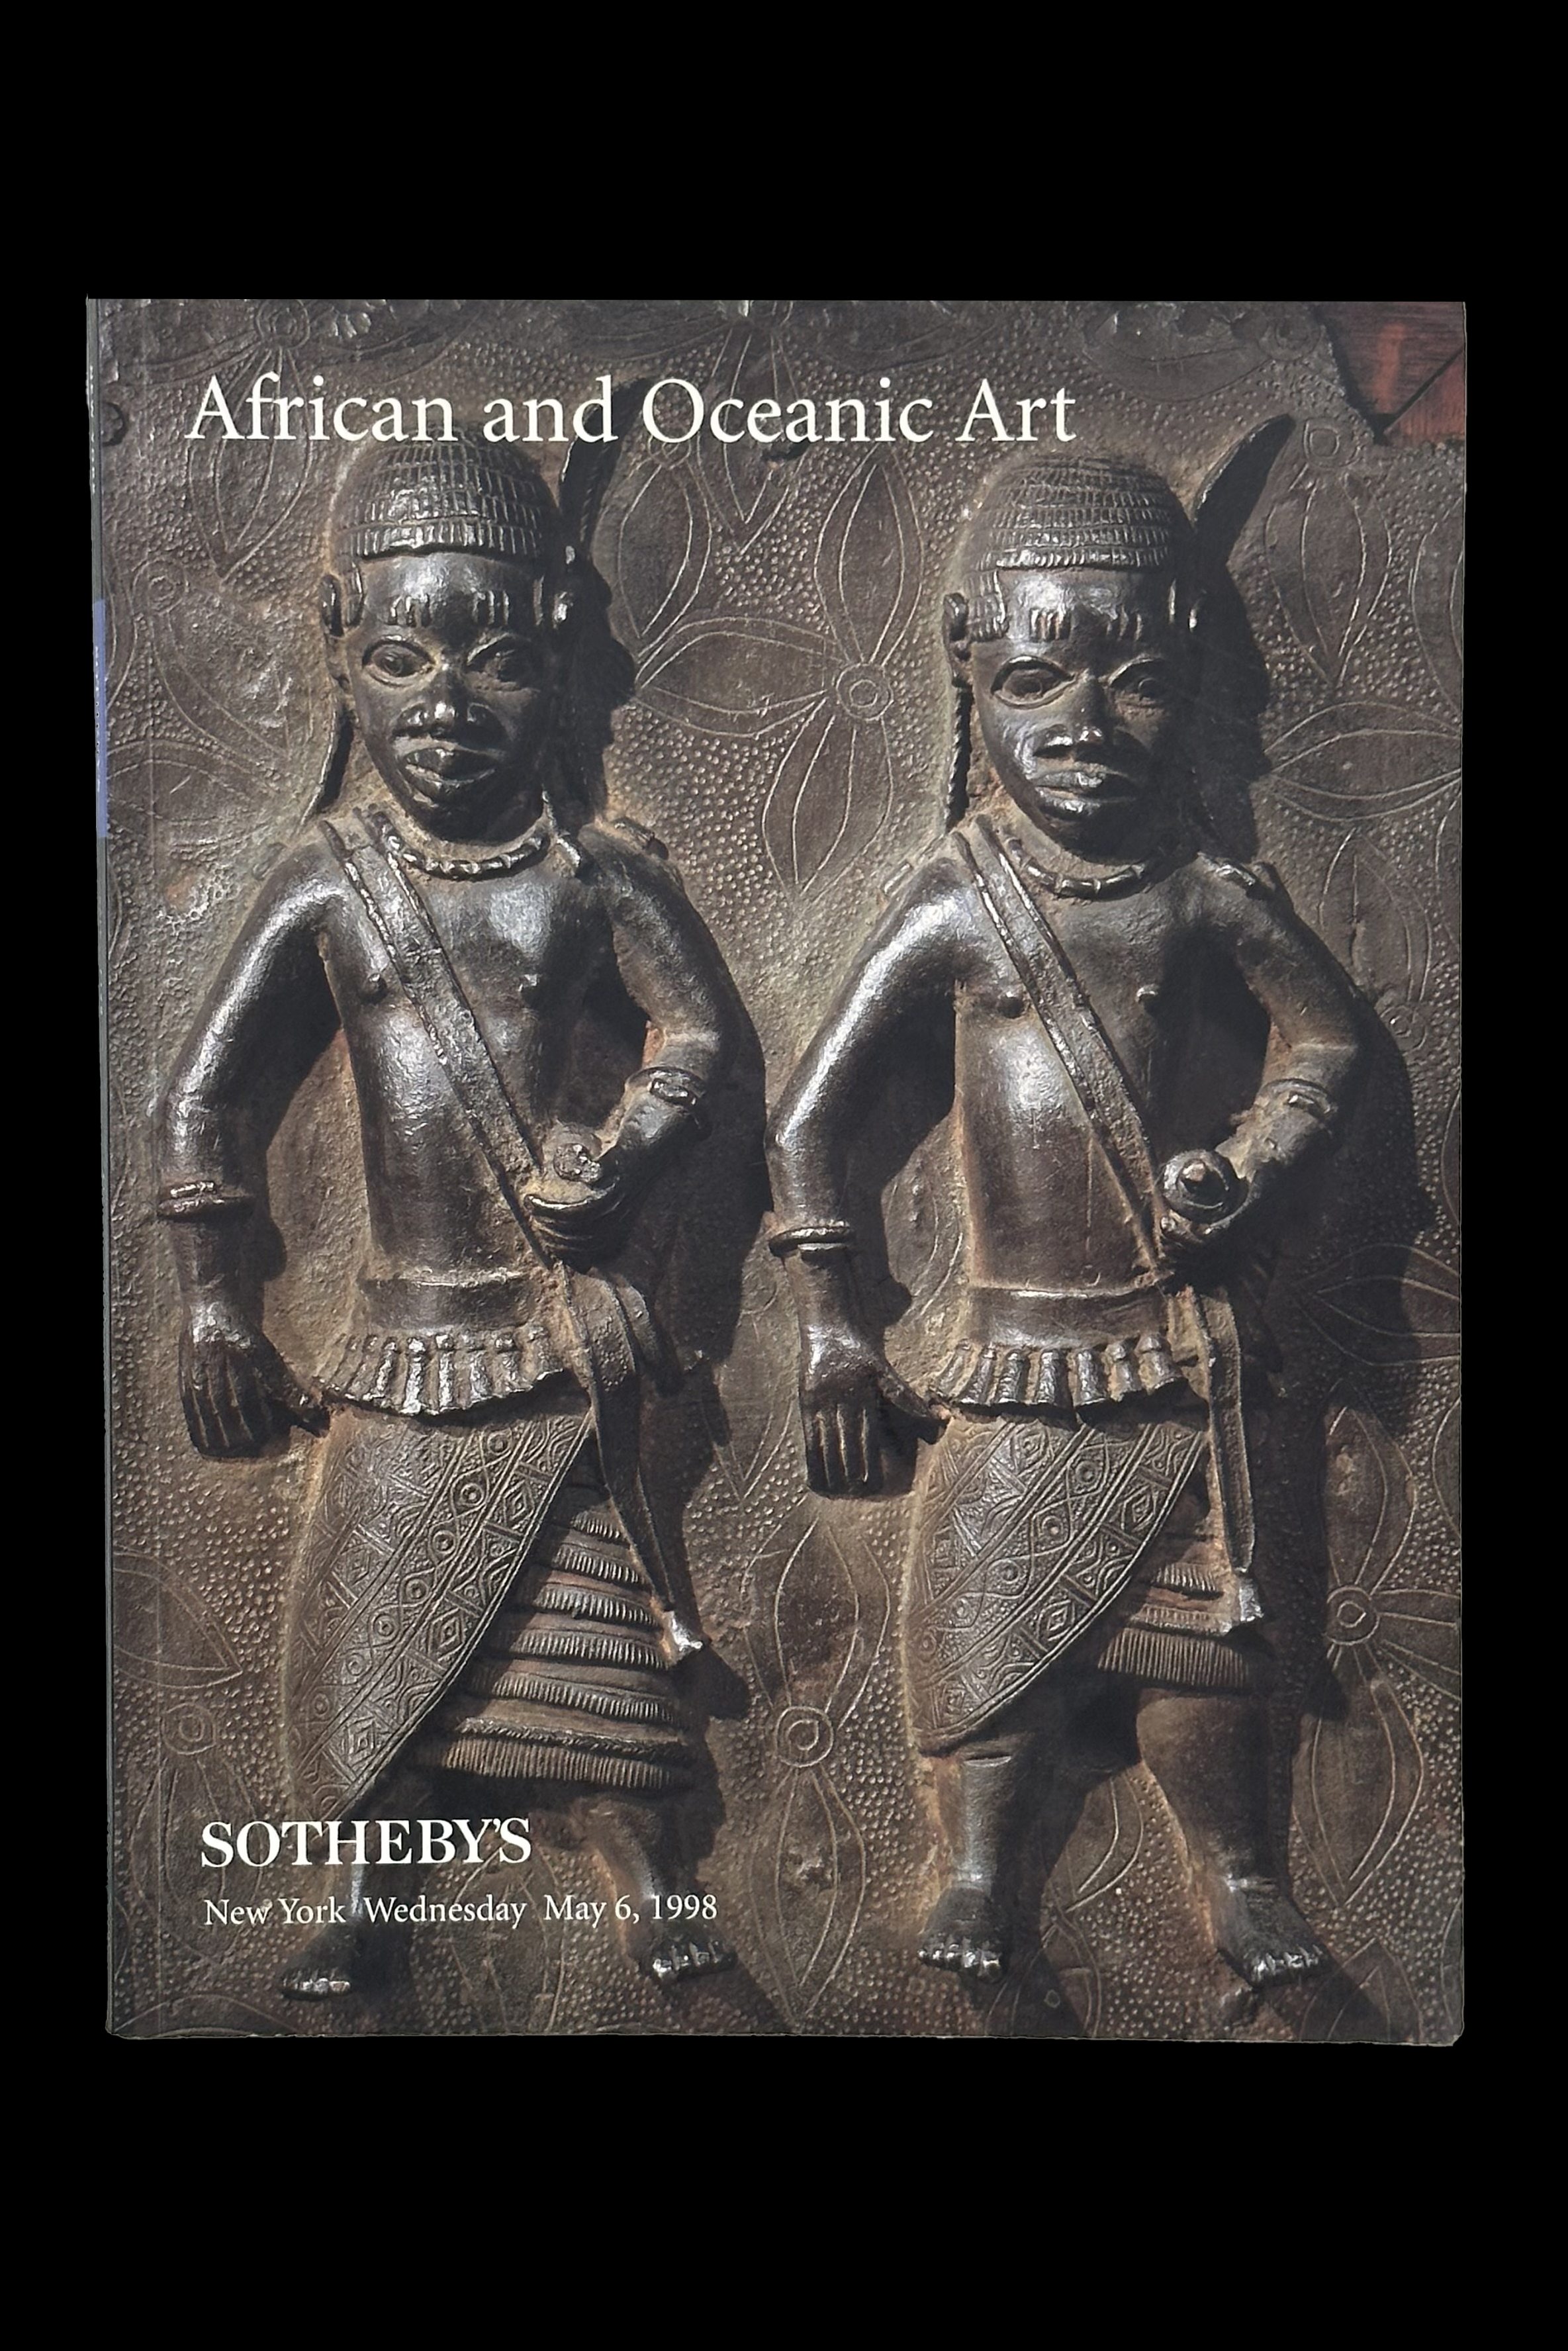 Sotheby's - African and Oceanic Art - New York, May 1998